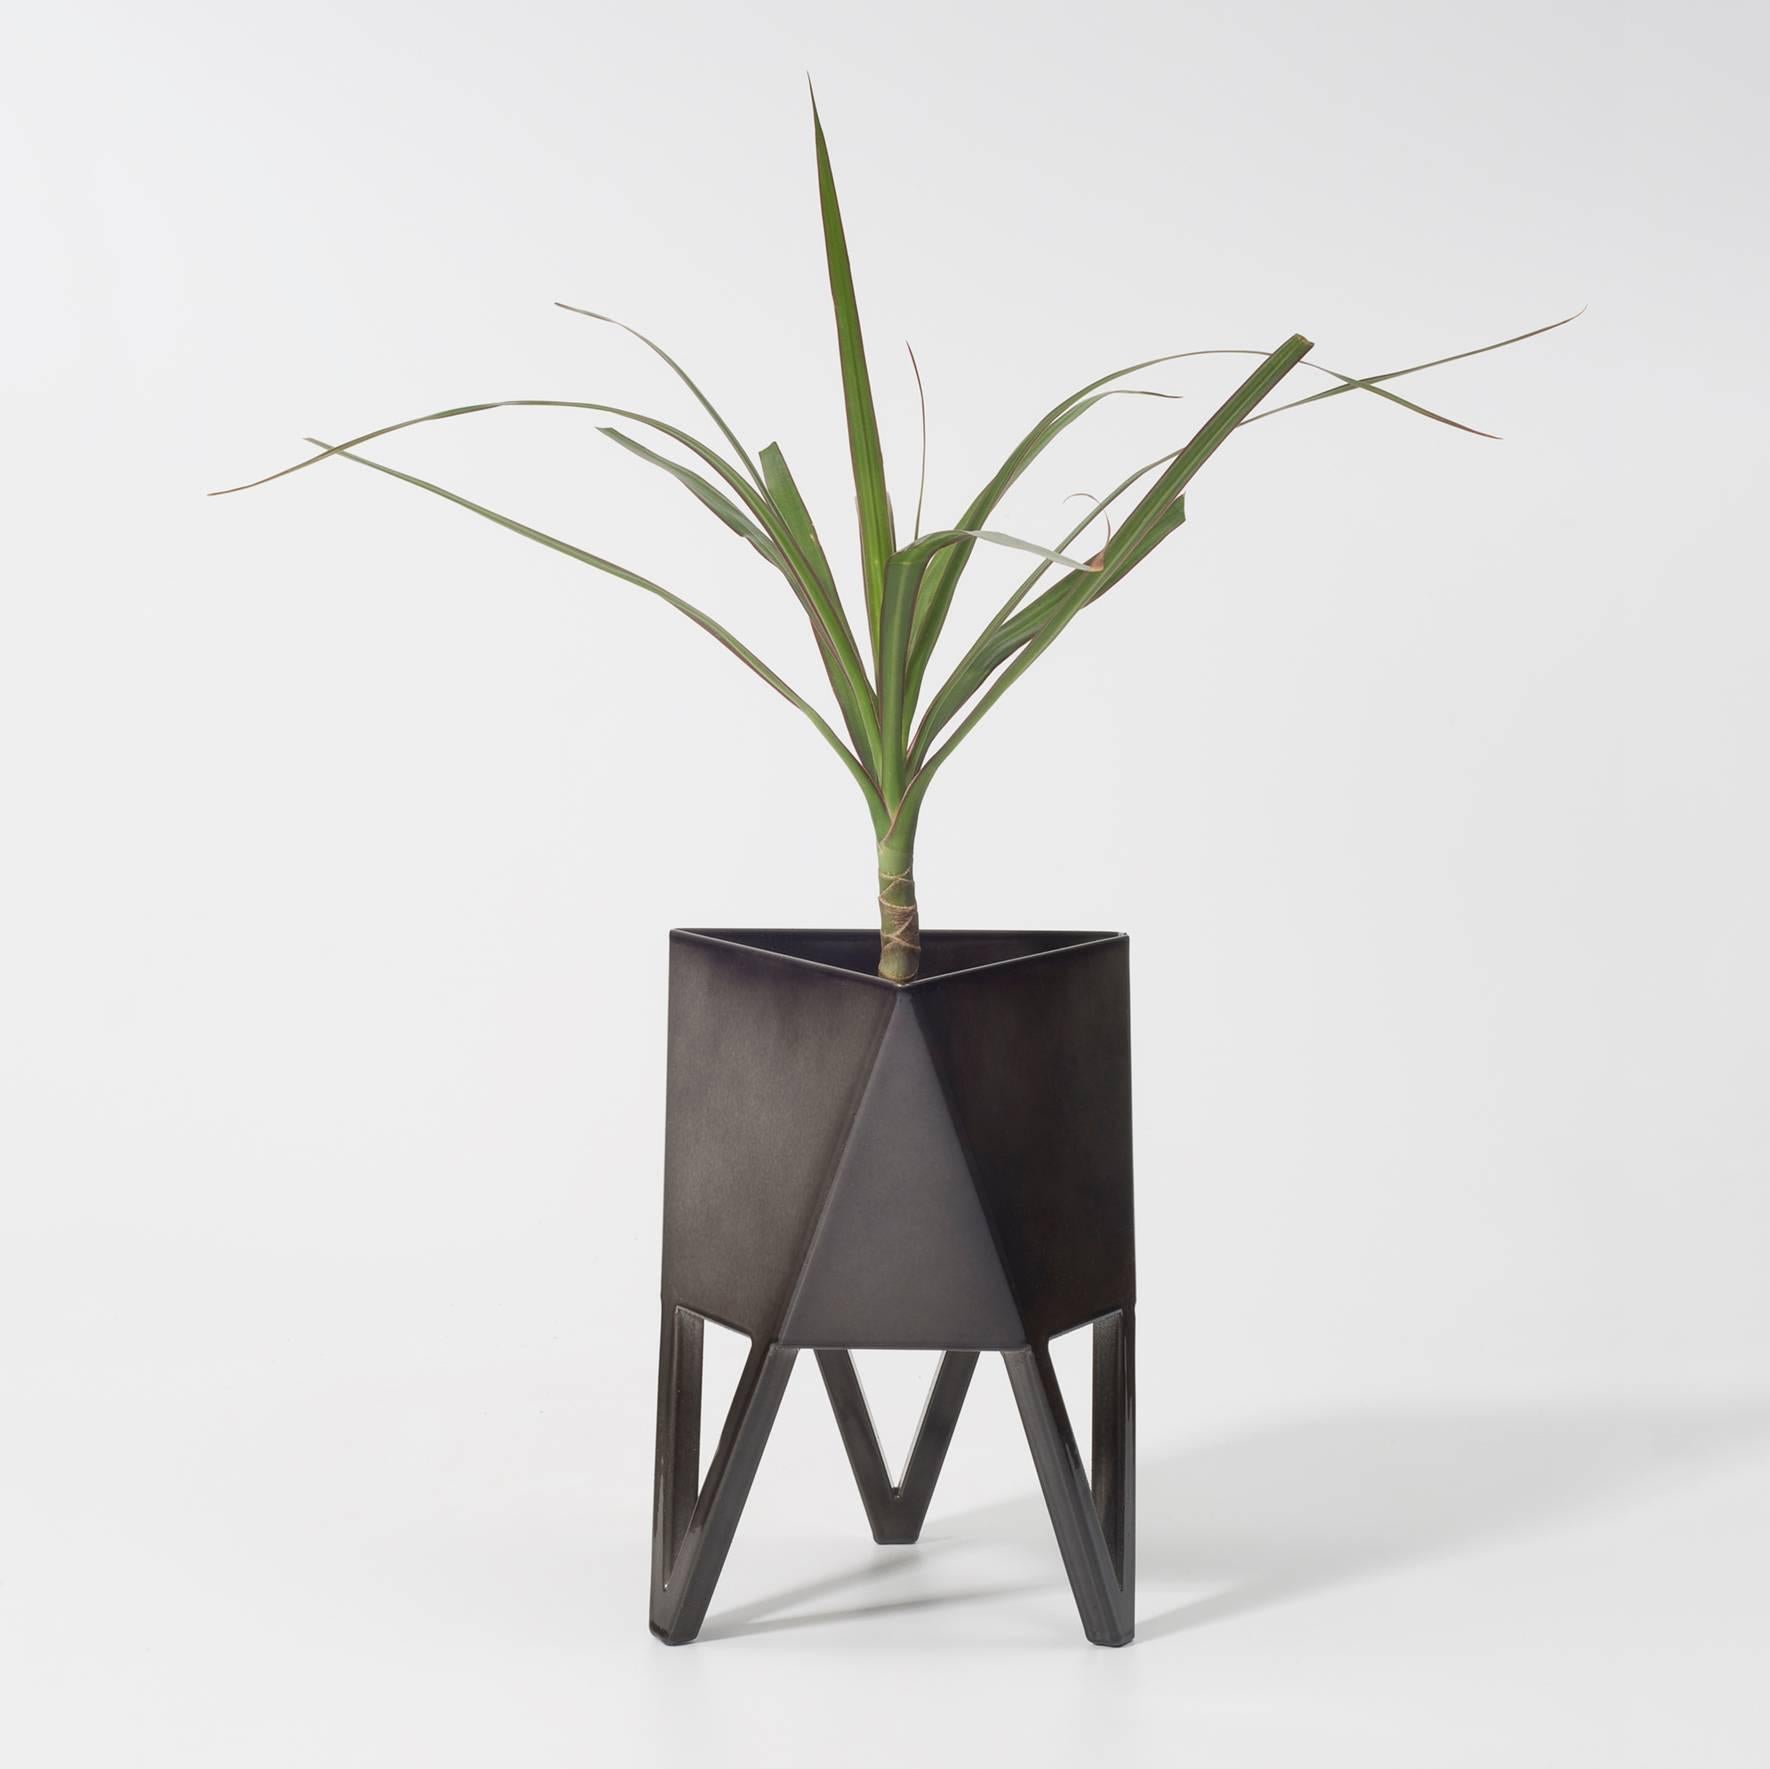 Deca Planter in Glossy White Steel, Medium, by Force/Collide 3